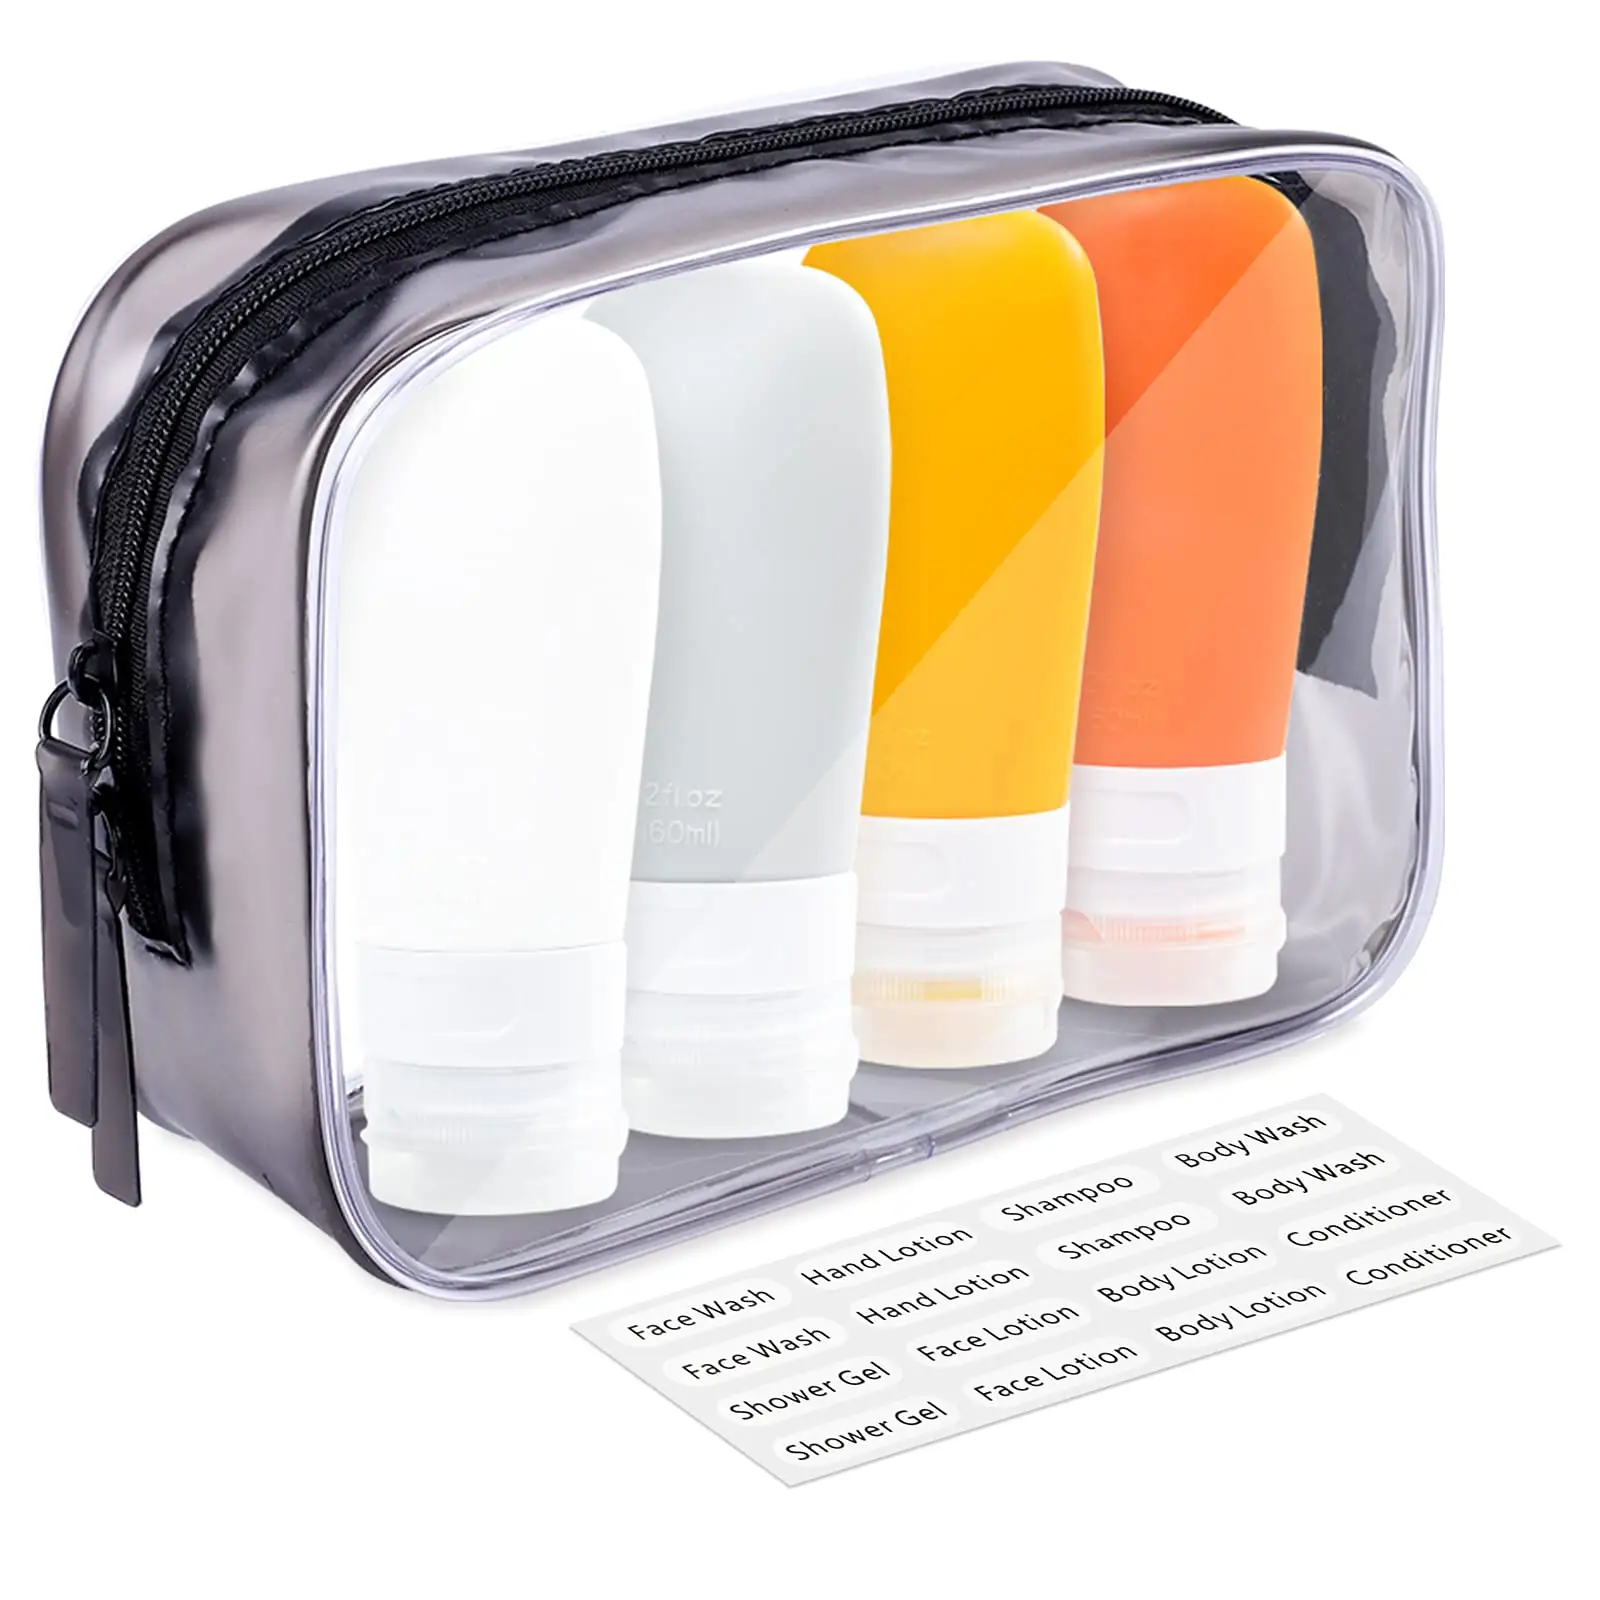 Portable Squeeze Silicone Travel Accessories Bottle Empty Travel Size Shampoo Lotion Toiletries Bottles Set Kit